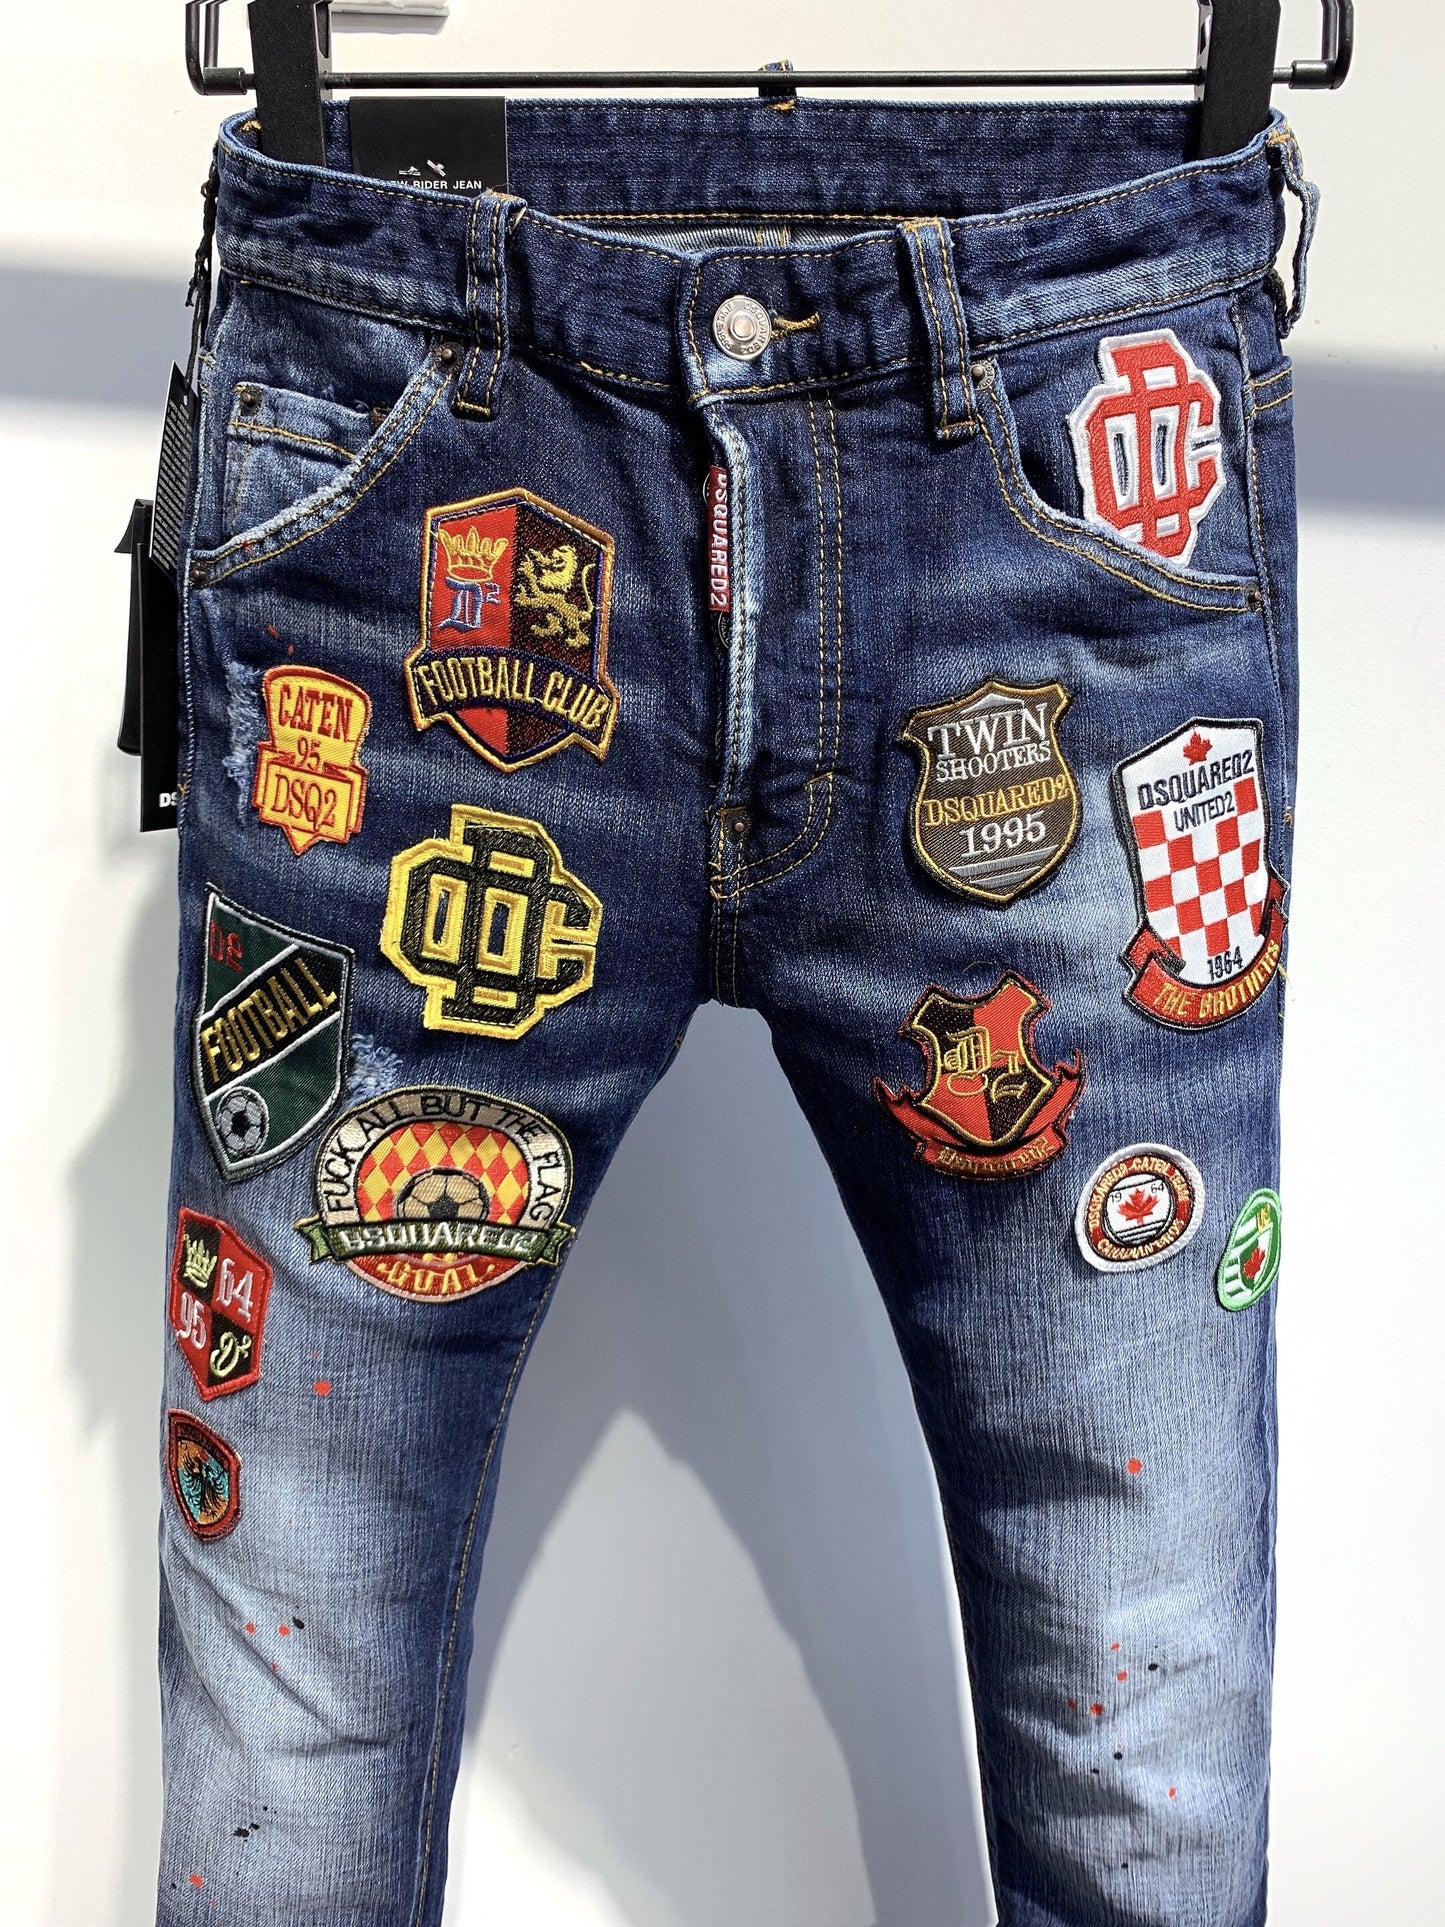 New Couple Vintage Medal Print Jeans Dsquared2 Fashion Washed Rippe – RyanEngel